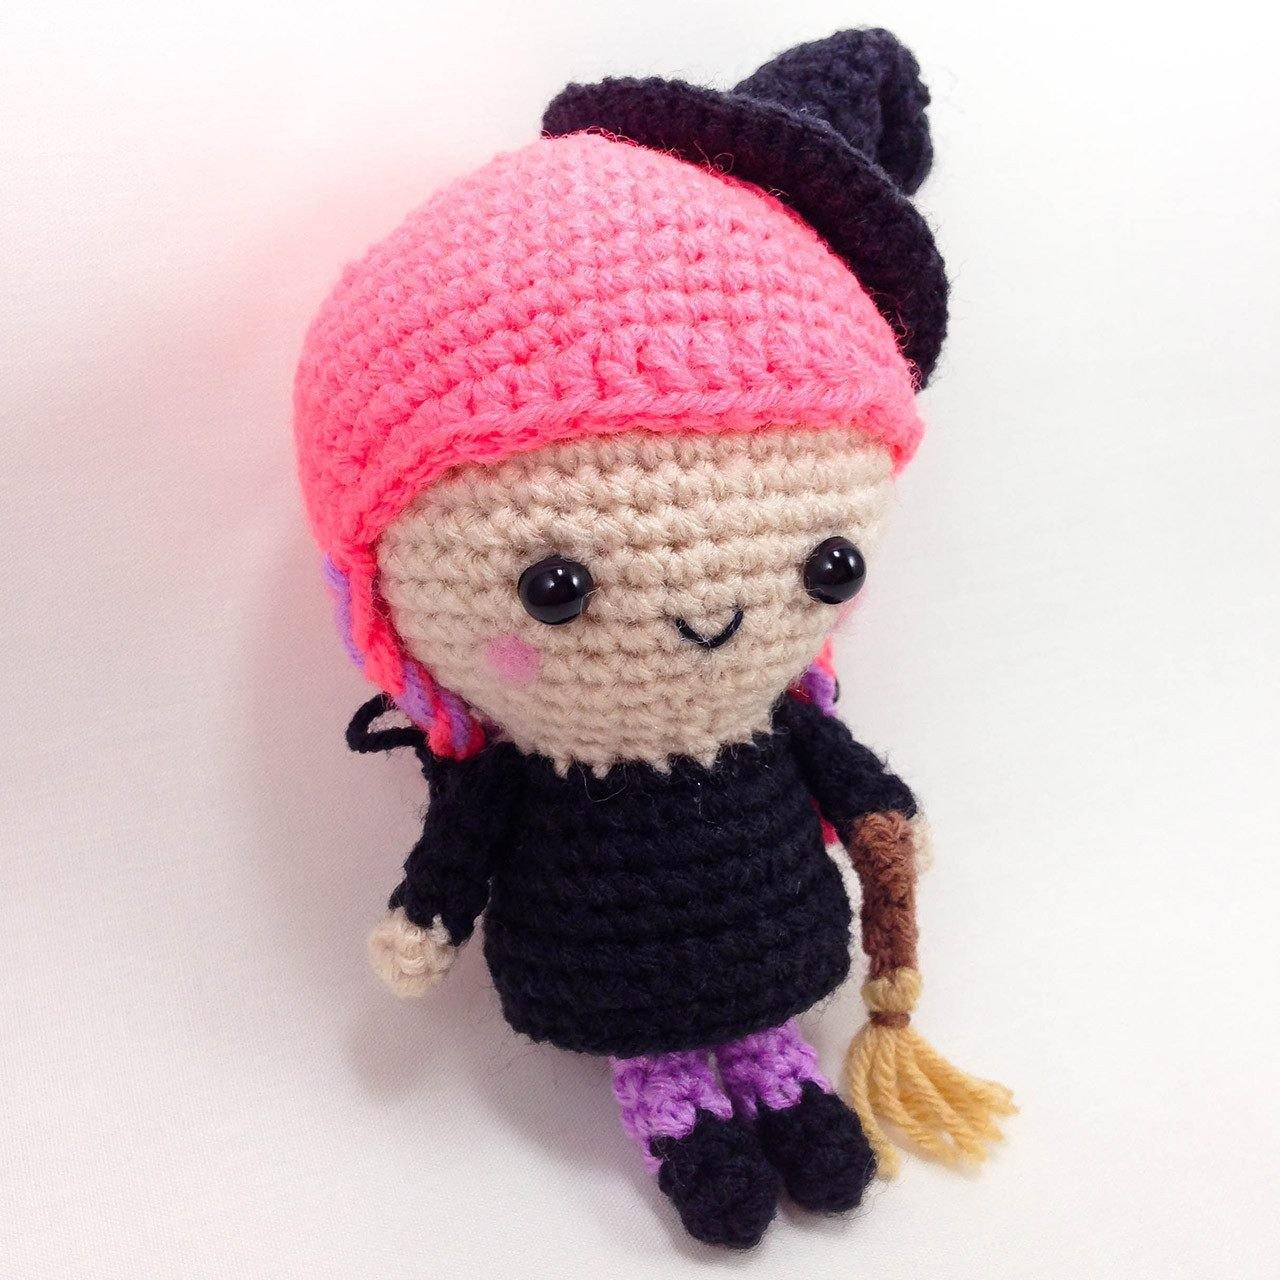 halloween crochet pattern - Flo the witch side view